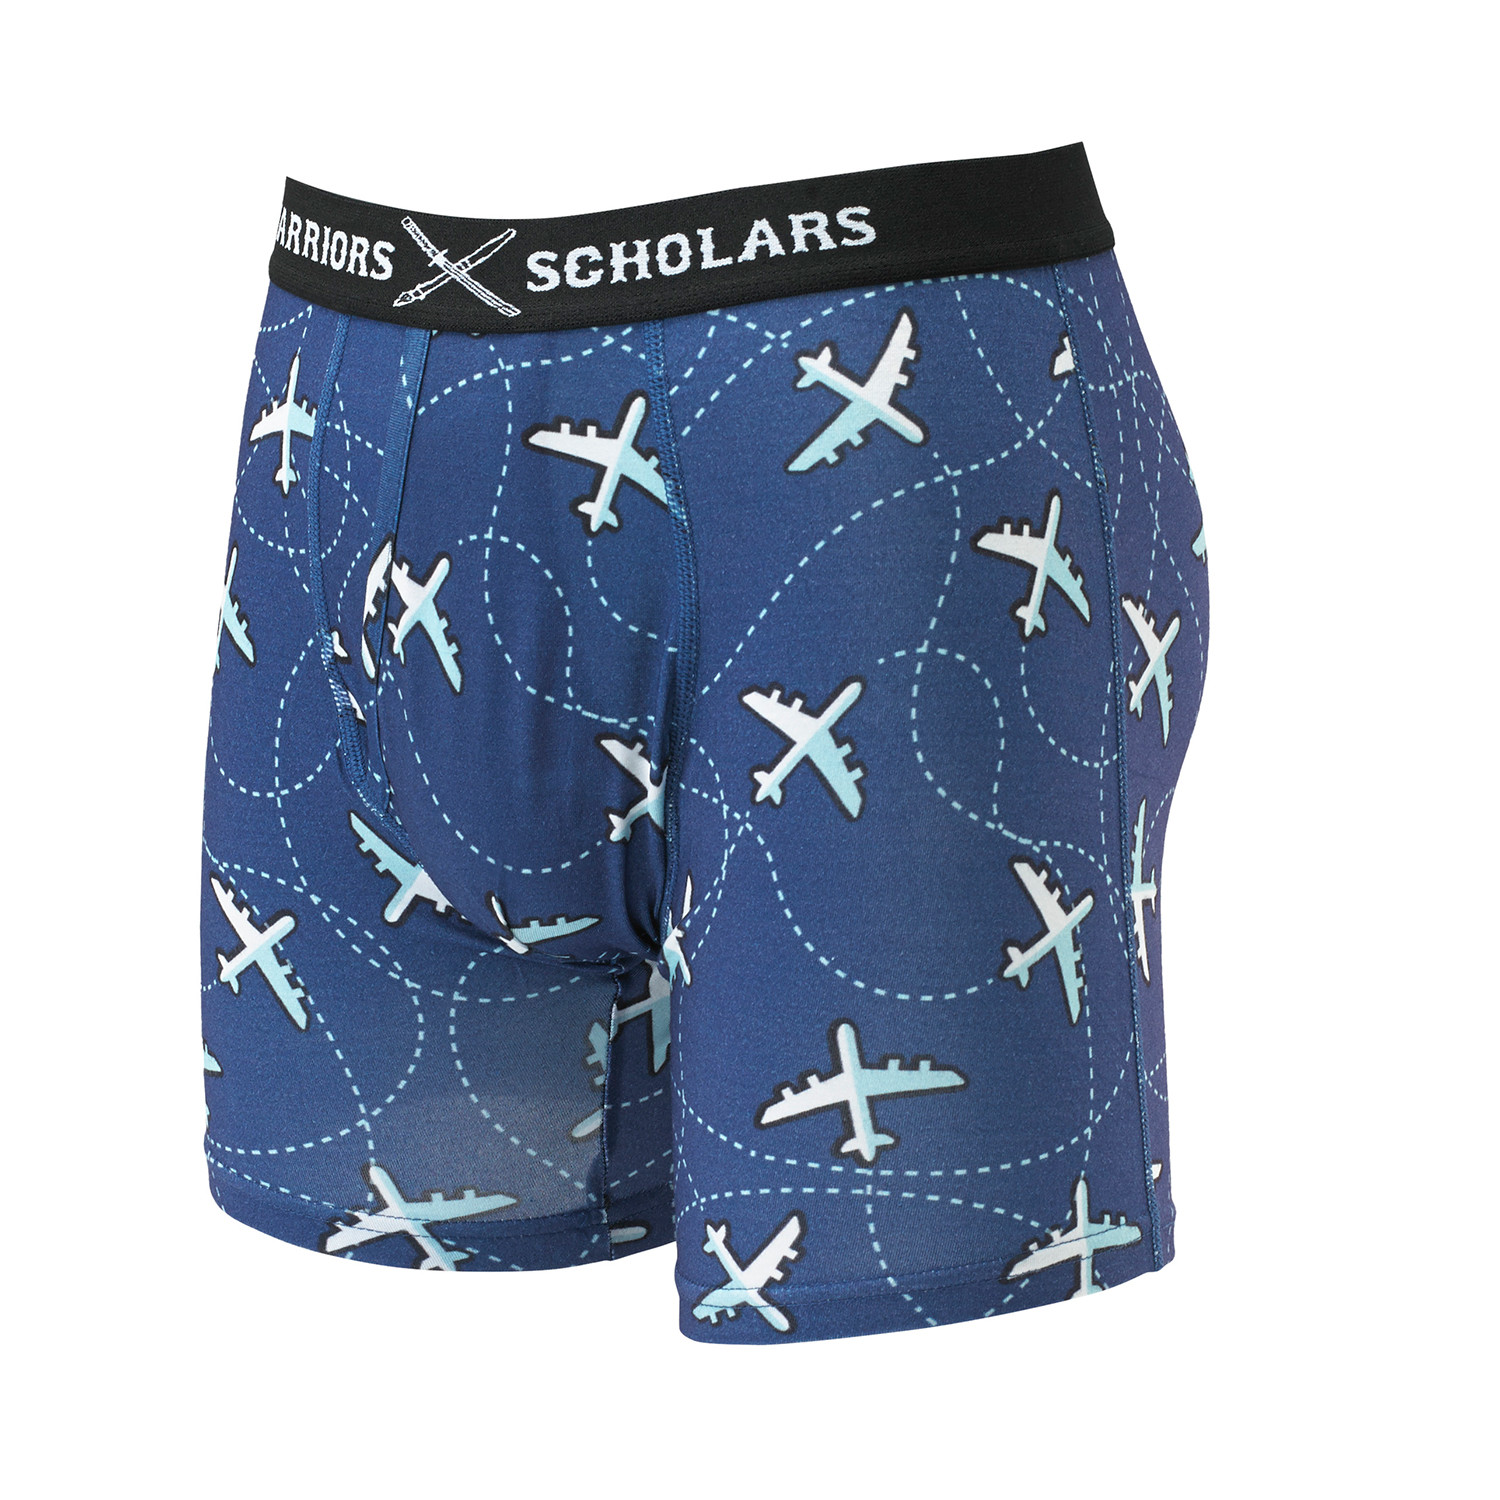 Flying High Softer Than Cotton Boxer Brief // Blue (L) - Warriors & Scholars  Underwear - Touch of Modern